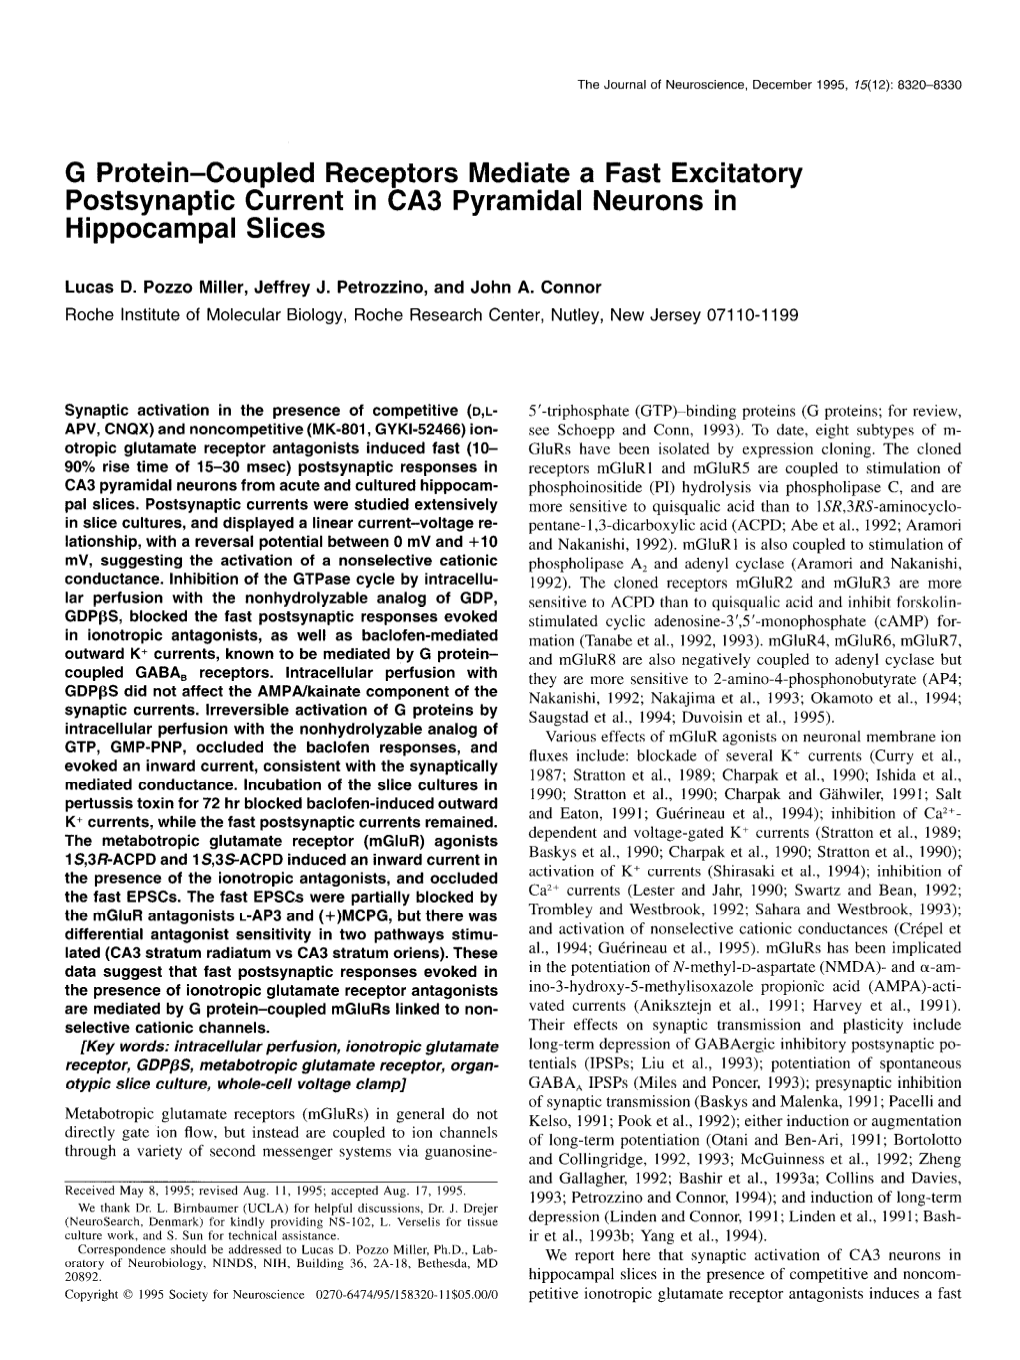 G Protein-Coupled Receptors Mediate a Fast Excitatory Postsynaptic Current in CA3 Pyramidal Neurons in Hippobanipal Slices